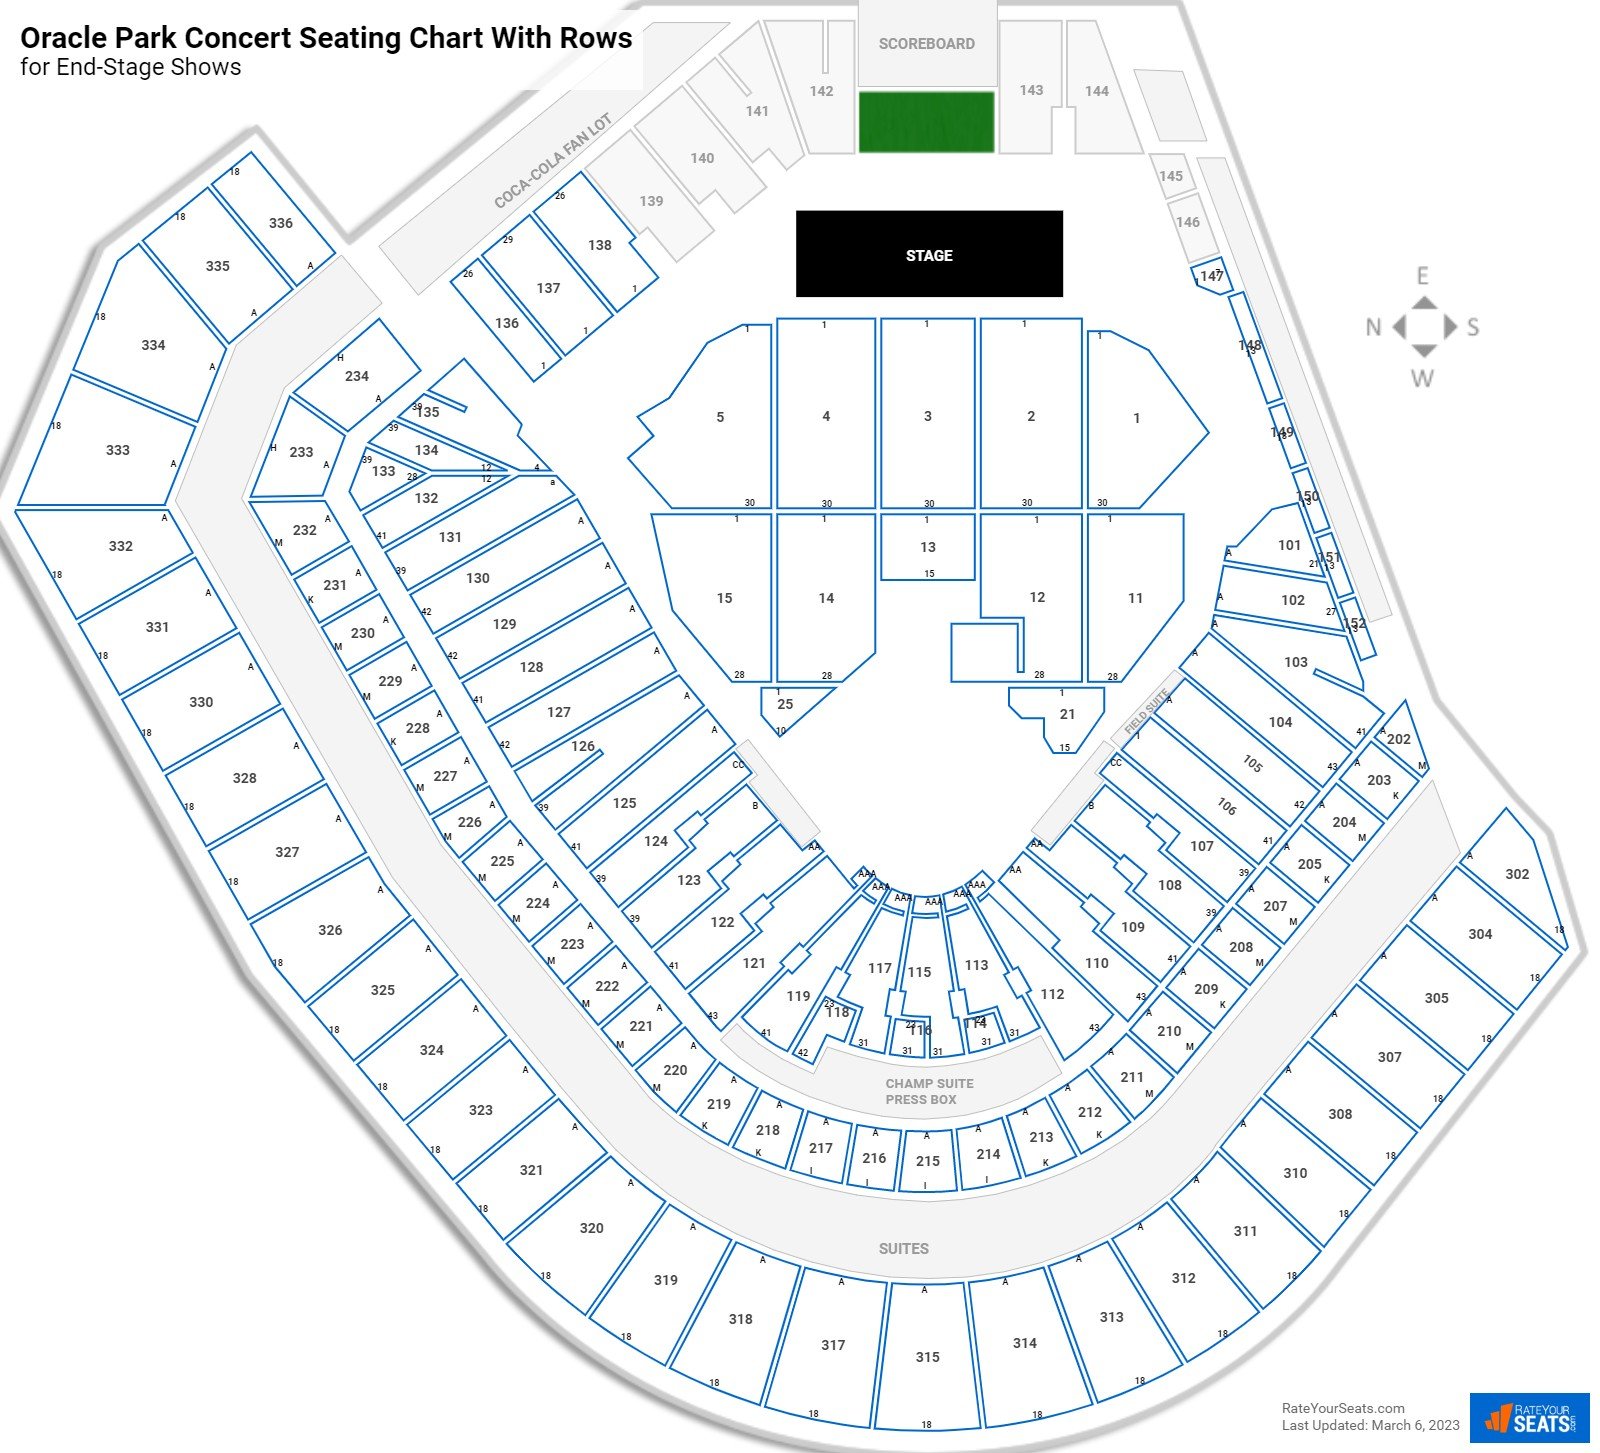 Oracle Park Seating Charts for Concerts